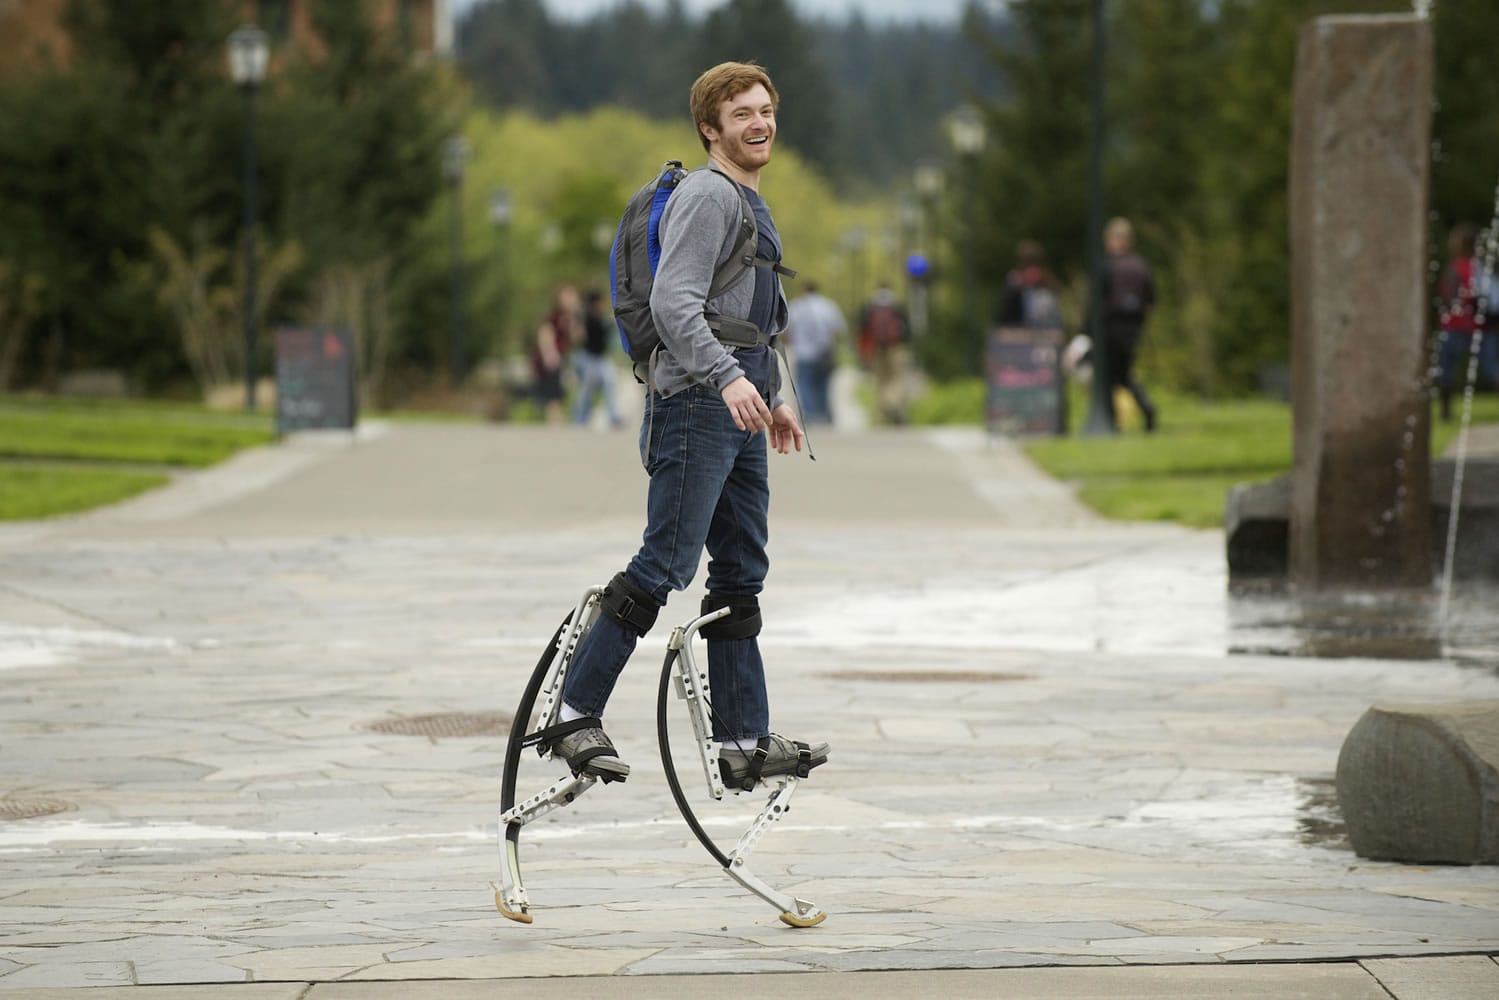 Tanner Roggenkamp has fun on his Powerisers between classes at Washington State University Vancouver. Although he was diagnosed with Type 1 diabetes and multiple learning disabilities, he is graduating from WSUV on Saturday.